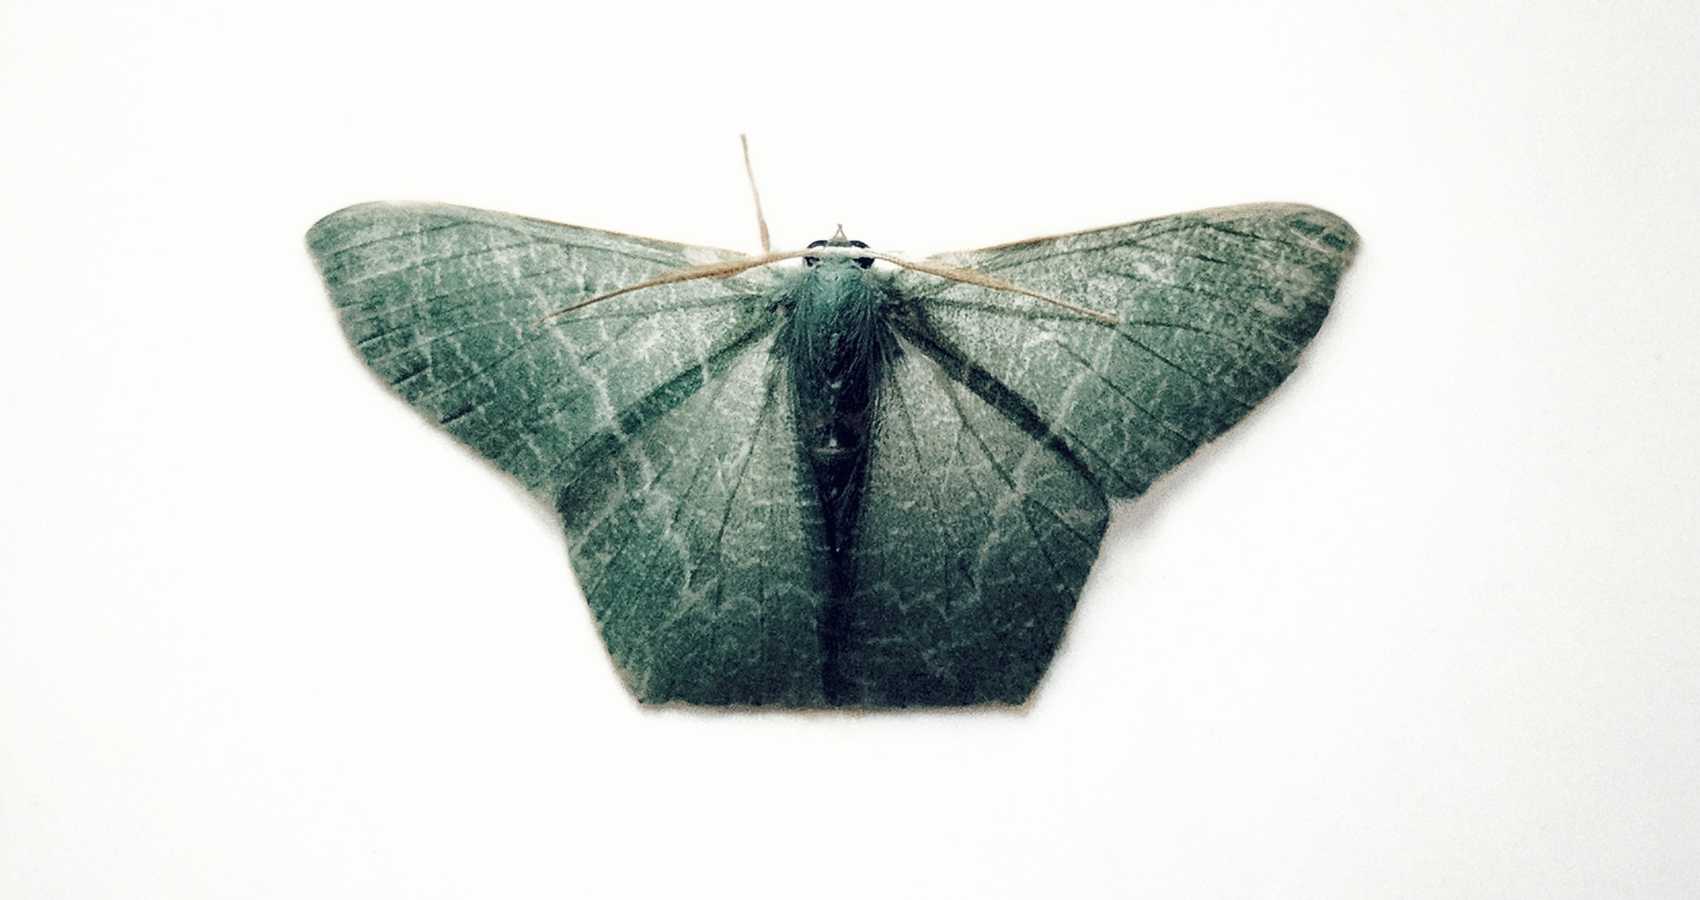 Death of The Moth, flash fiction by Marc Frazier at Spillwords.com